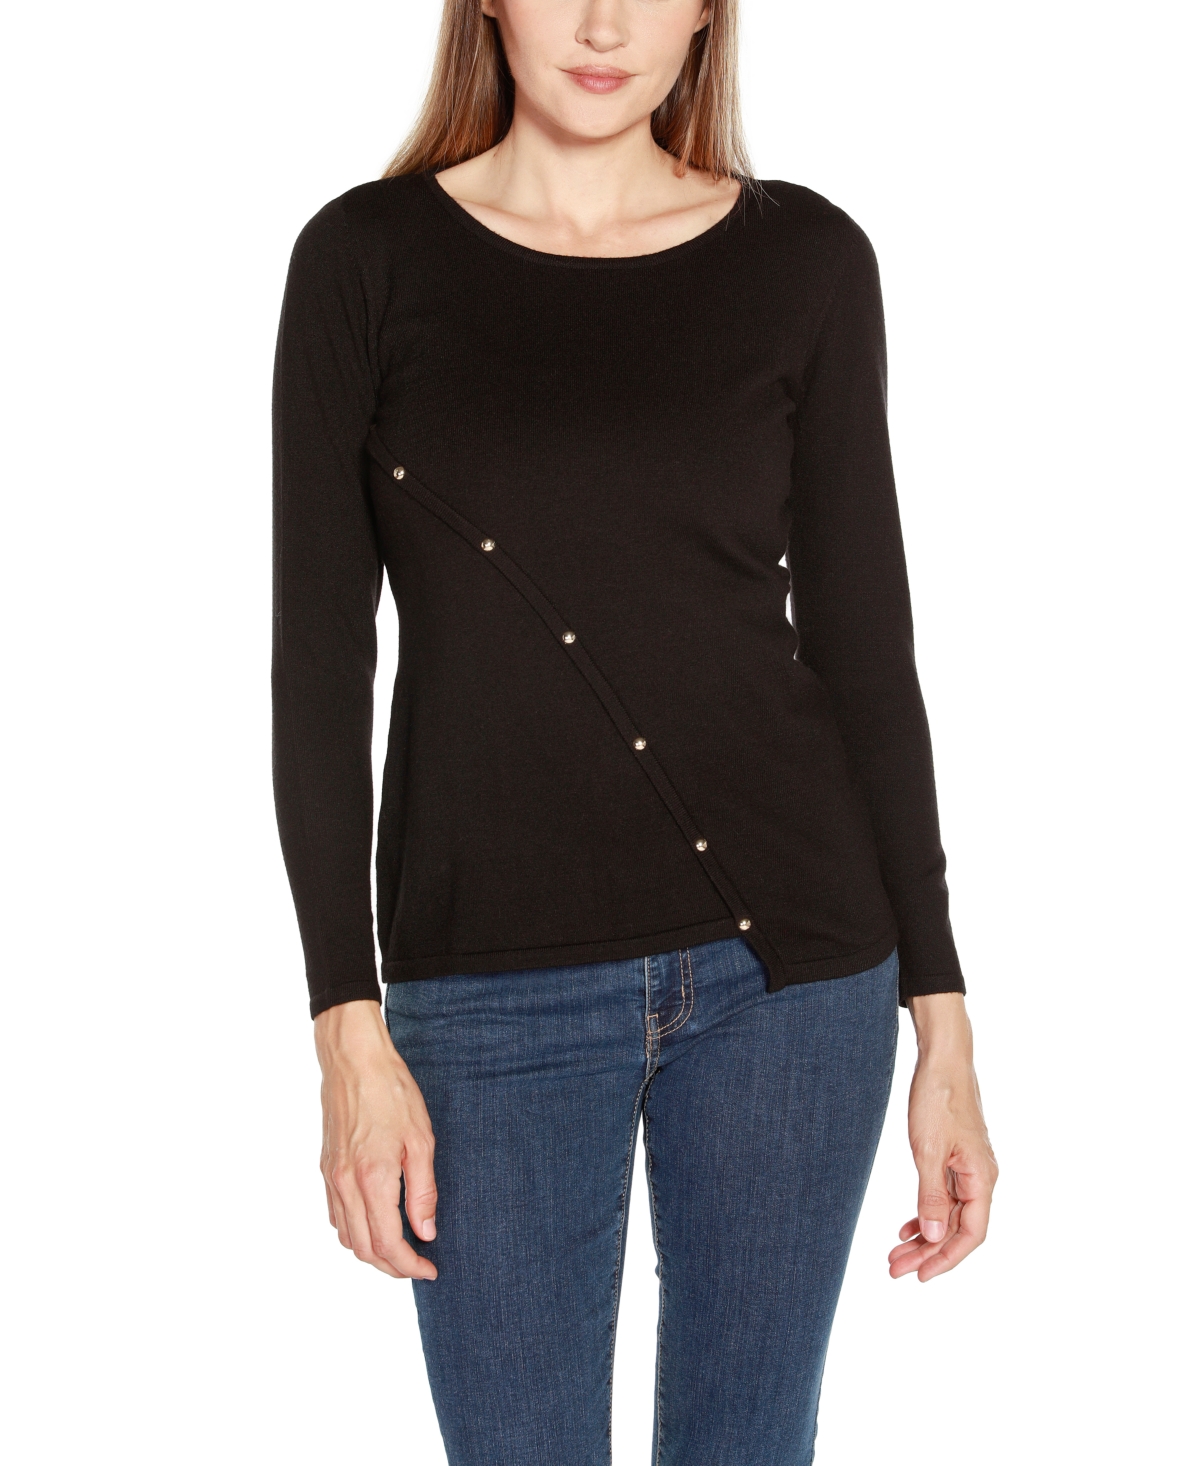 Women's Asymmetrical Crossover-Front Sweater - Black